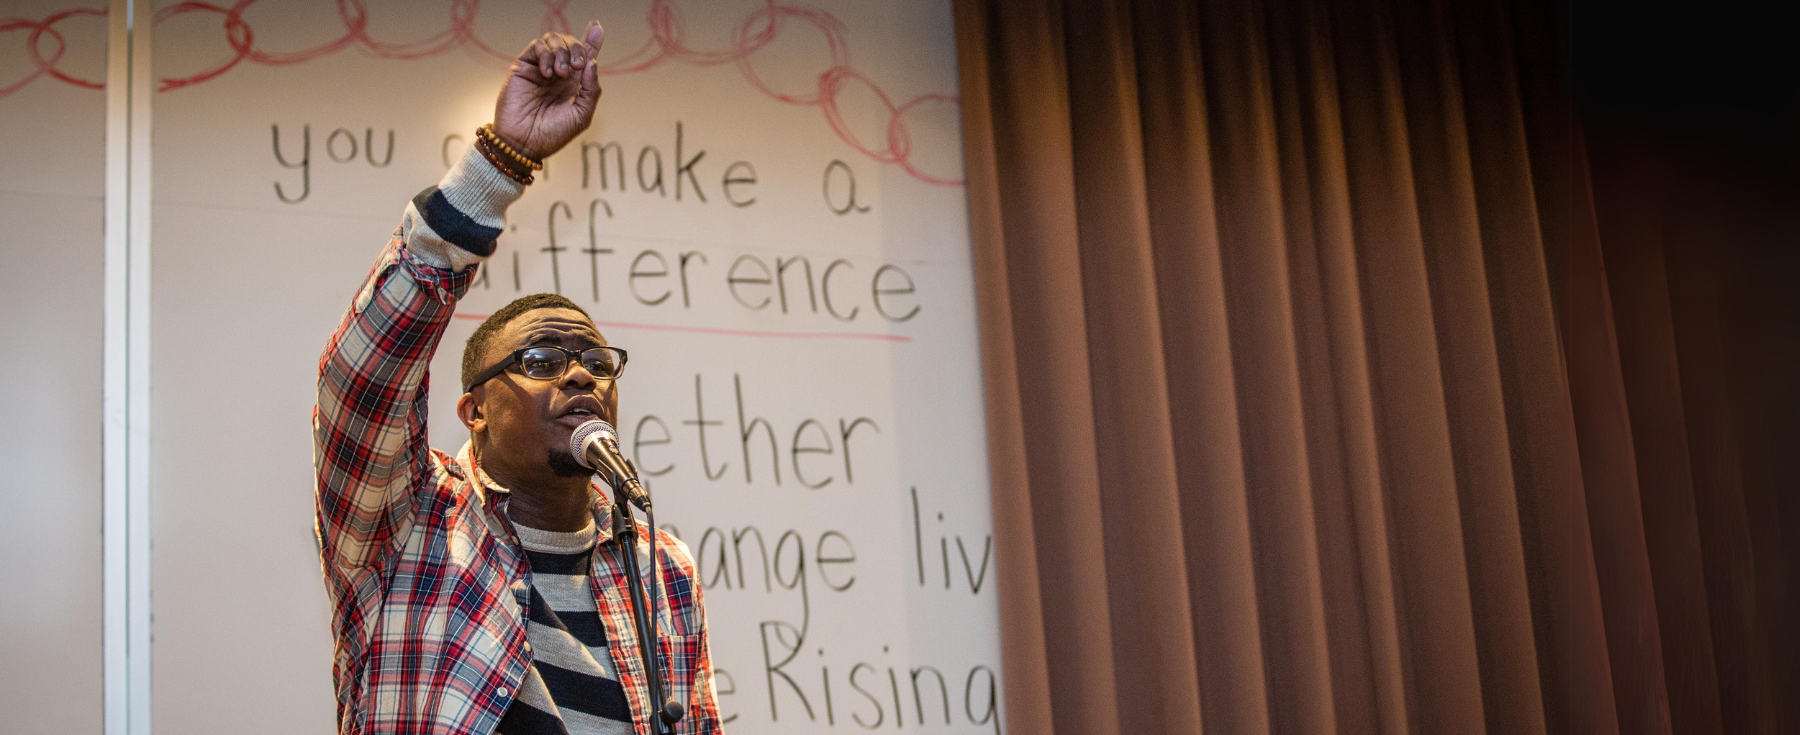 A student speaks out against racial injustice.